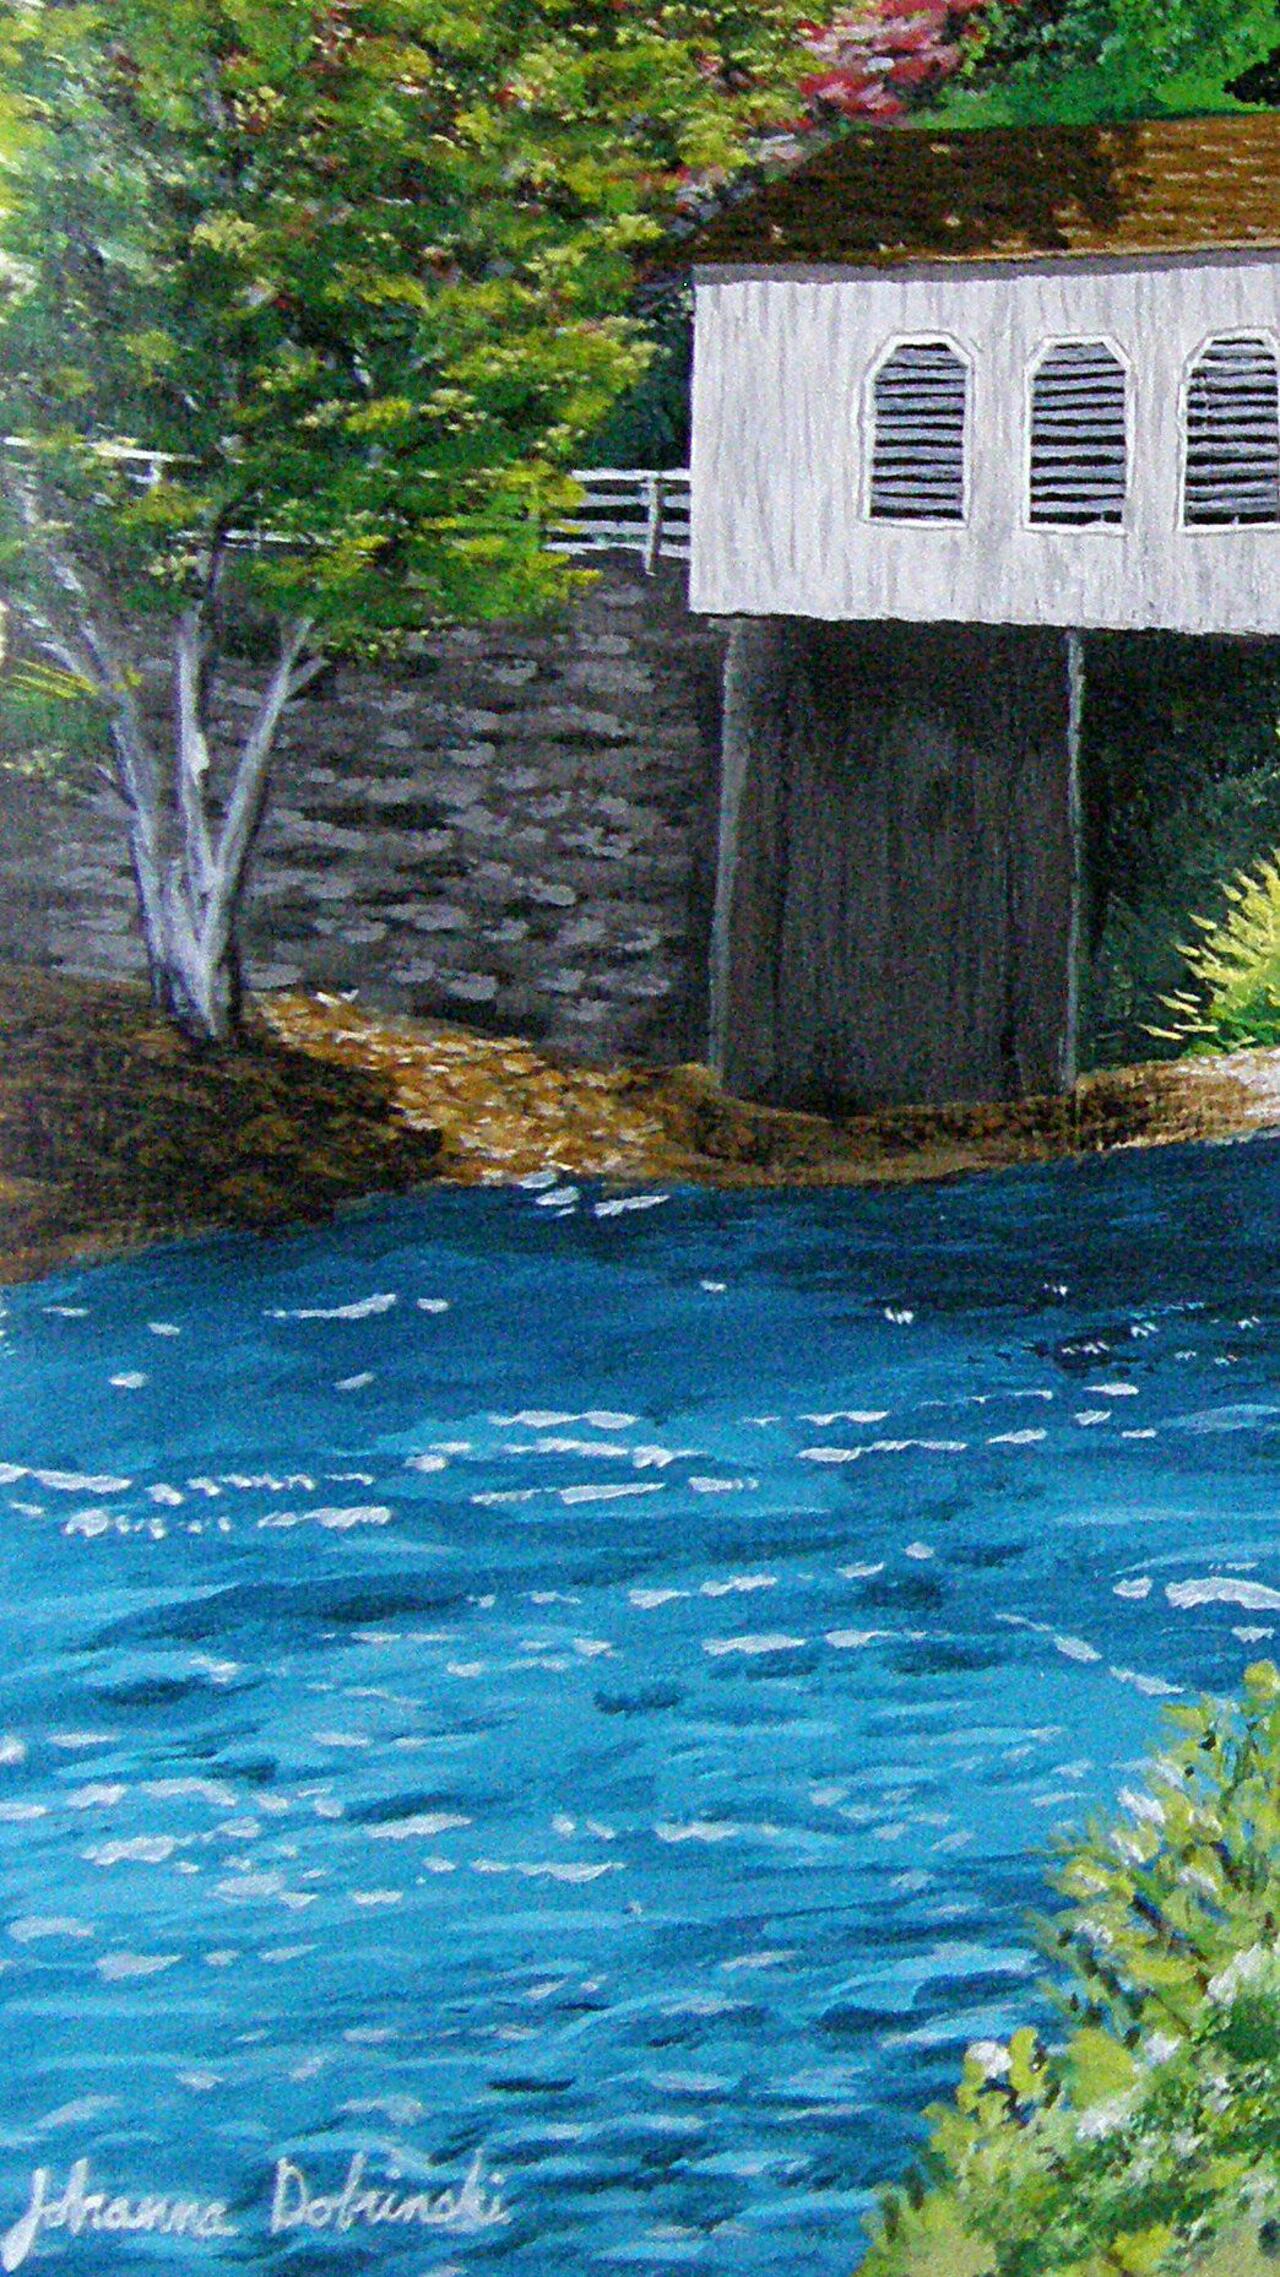 #Landscape commission of Good Pasture Bridge is finished! Just a clip... #art http://t.co/rUBuxrLgYa